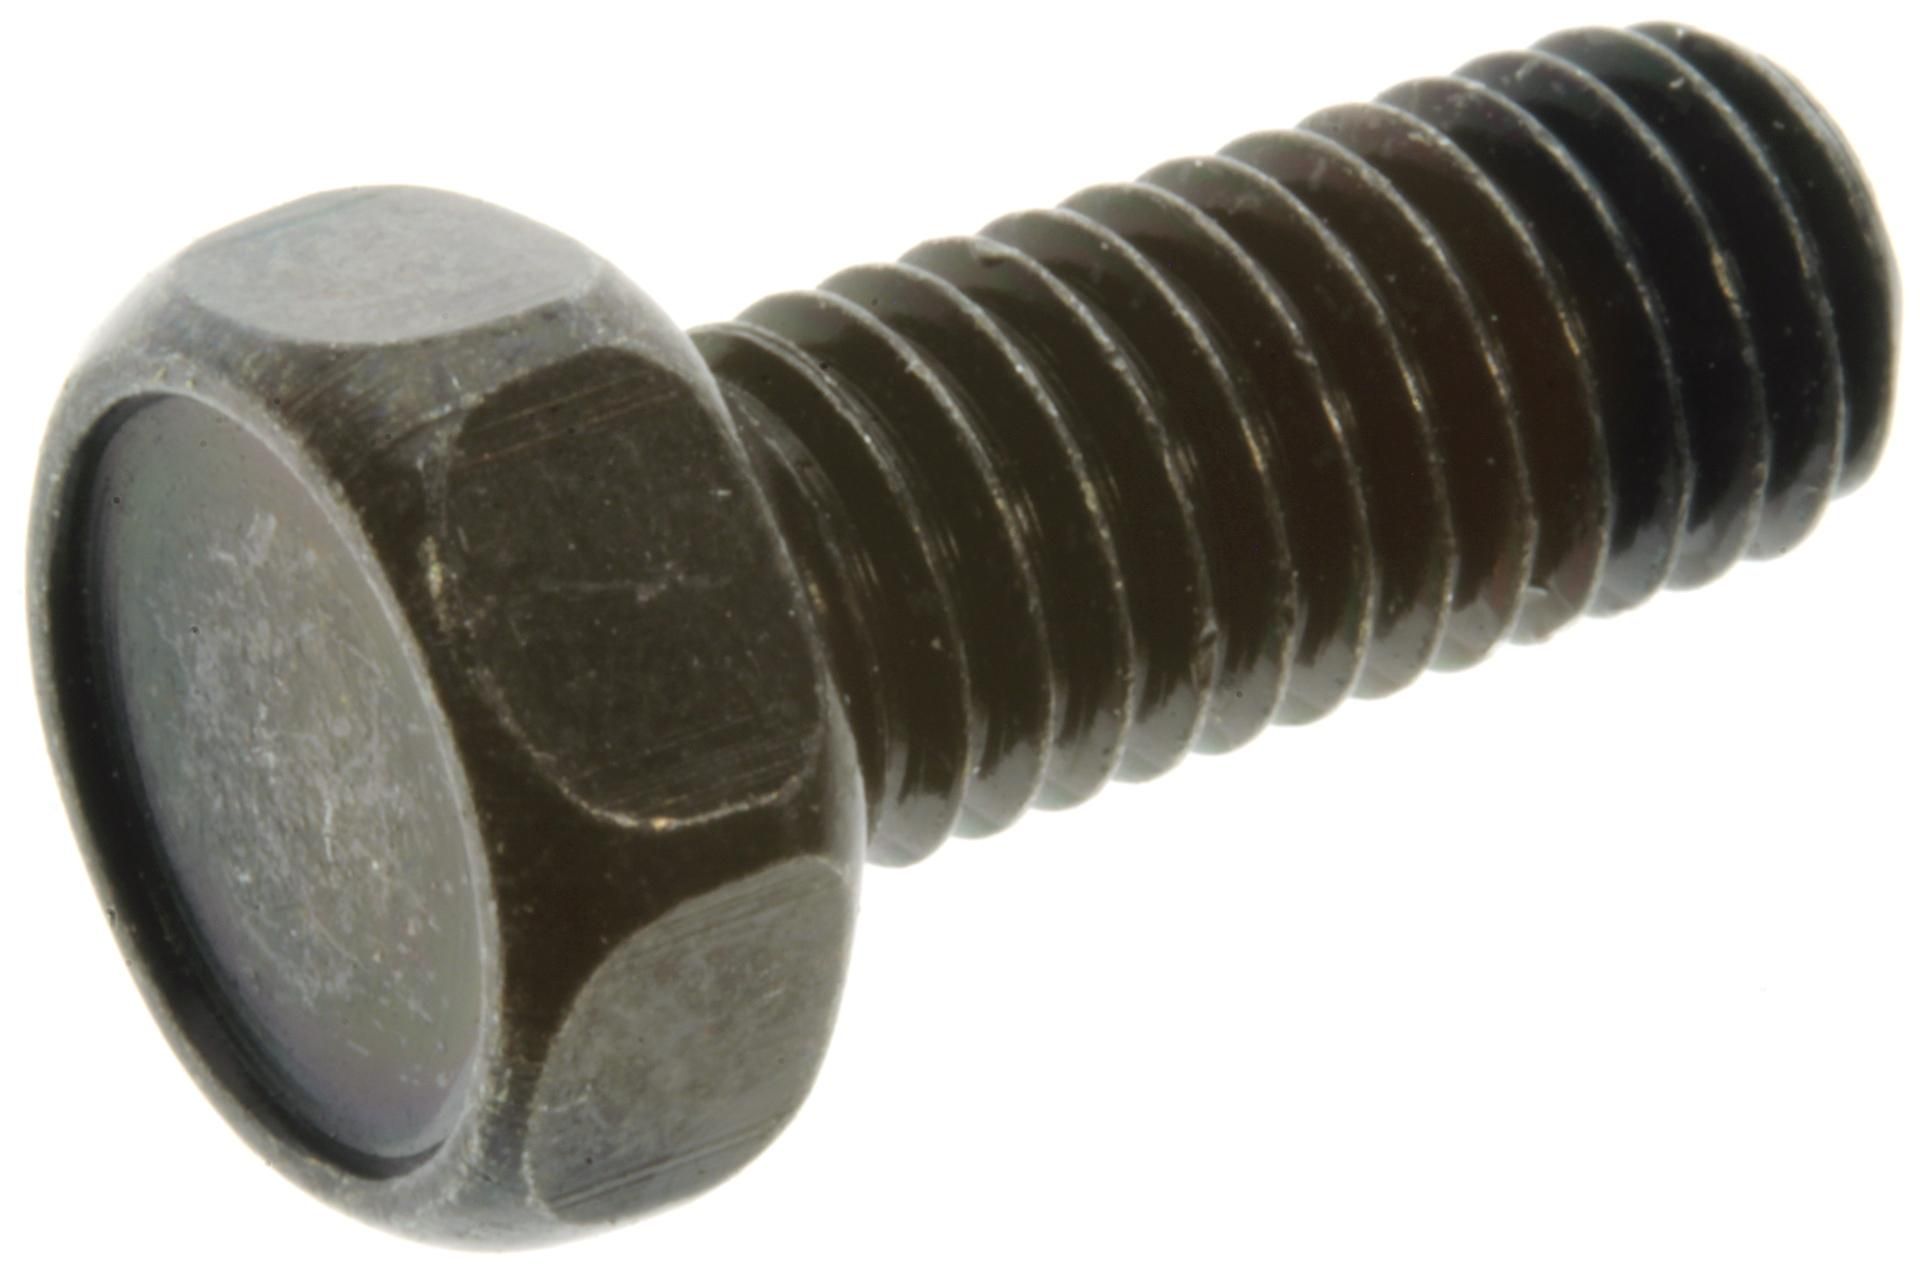 01104-05126 Superseded by 01500-0512B - BOLT